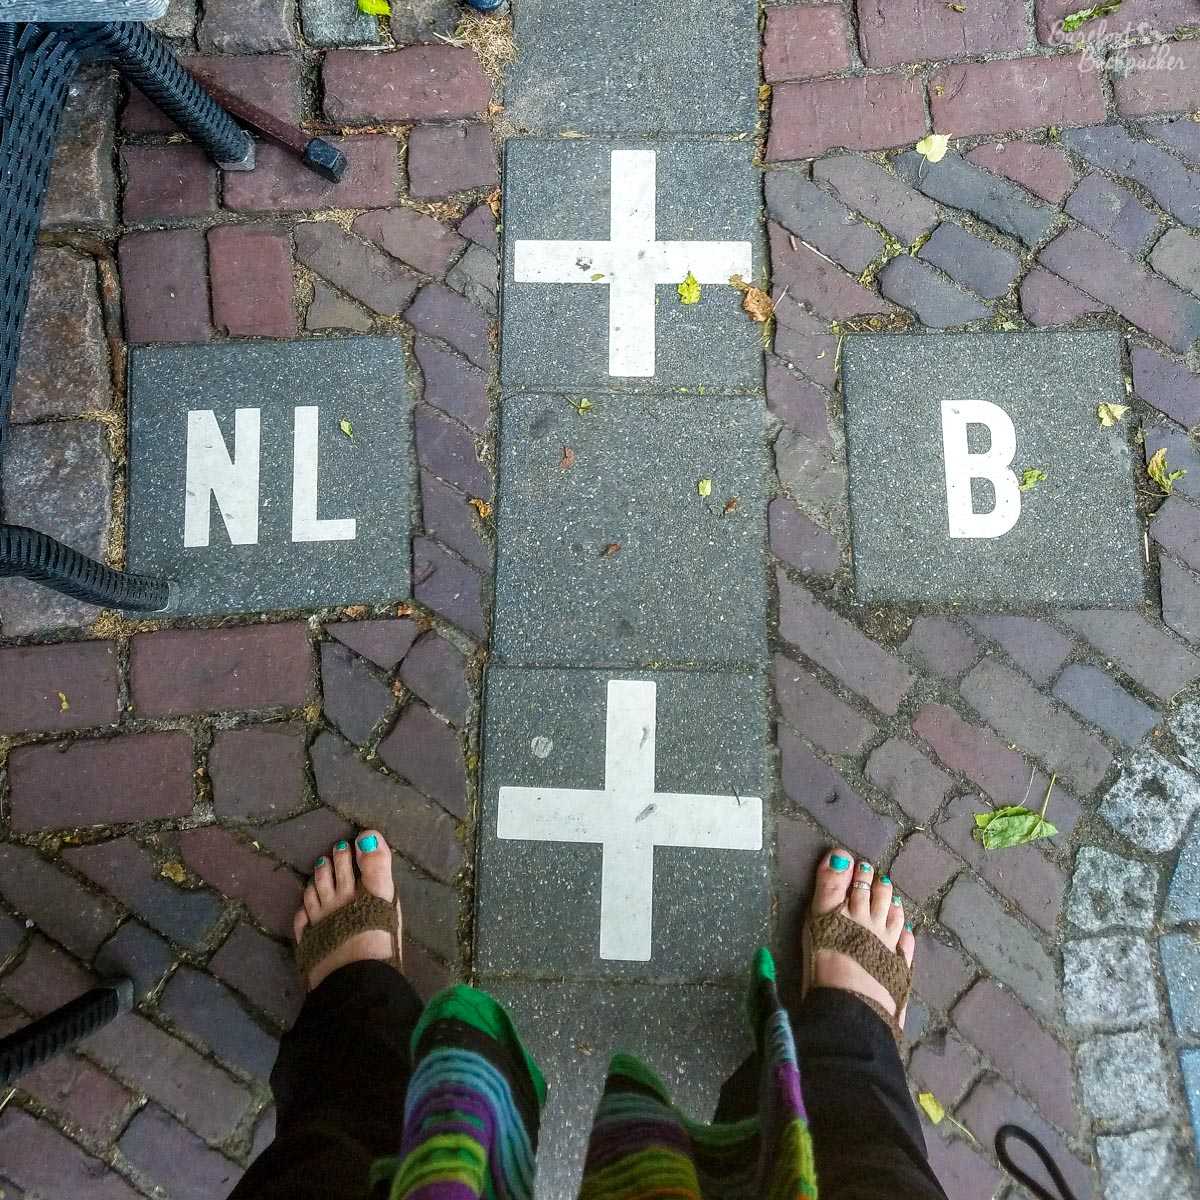 Stood astride the Dutch/Belgian border in Baarle-Hertog/Baarle-Nassau, one (bare) foot in each country. The quirky borders here were why it was on my Bucket List.